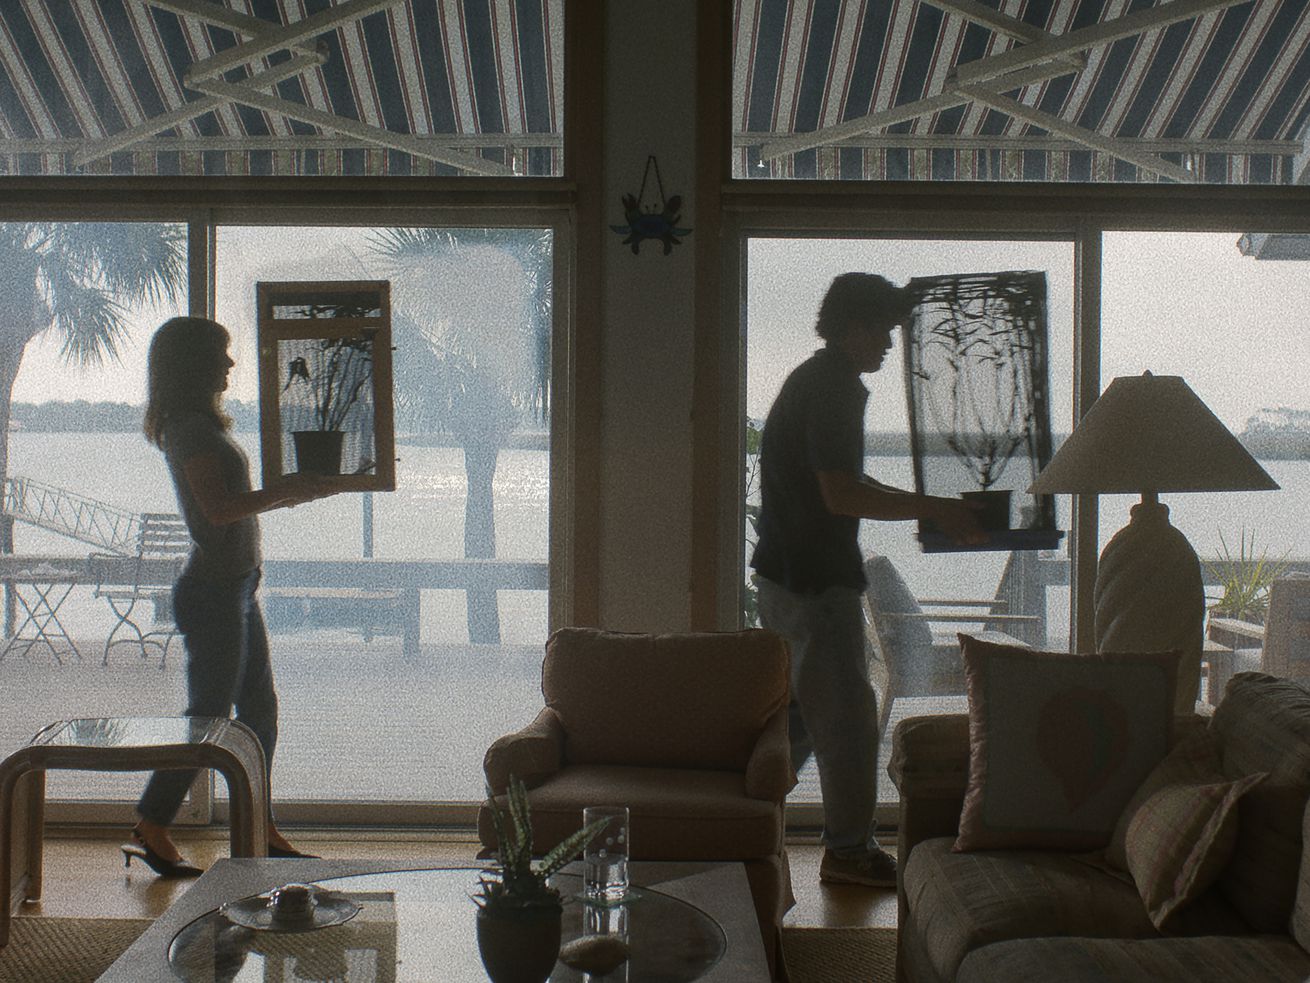 A scene from the movie May December shows a woman and a man, separated by several feet, walking through a home in front of large glass windows, each carrying a plant.